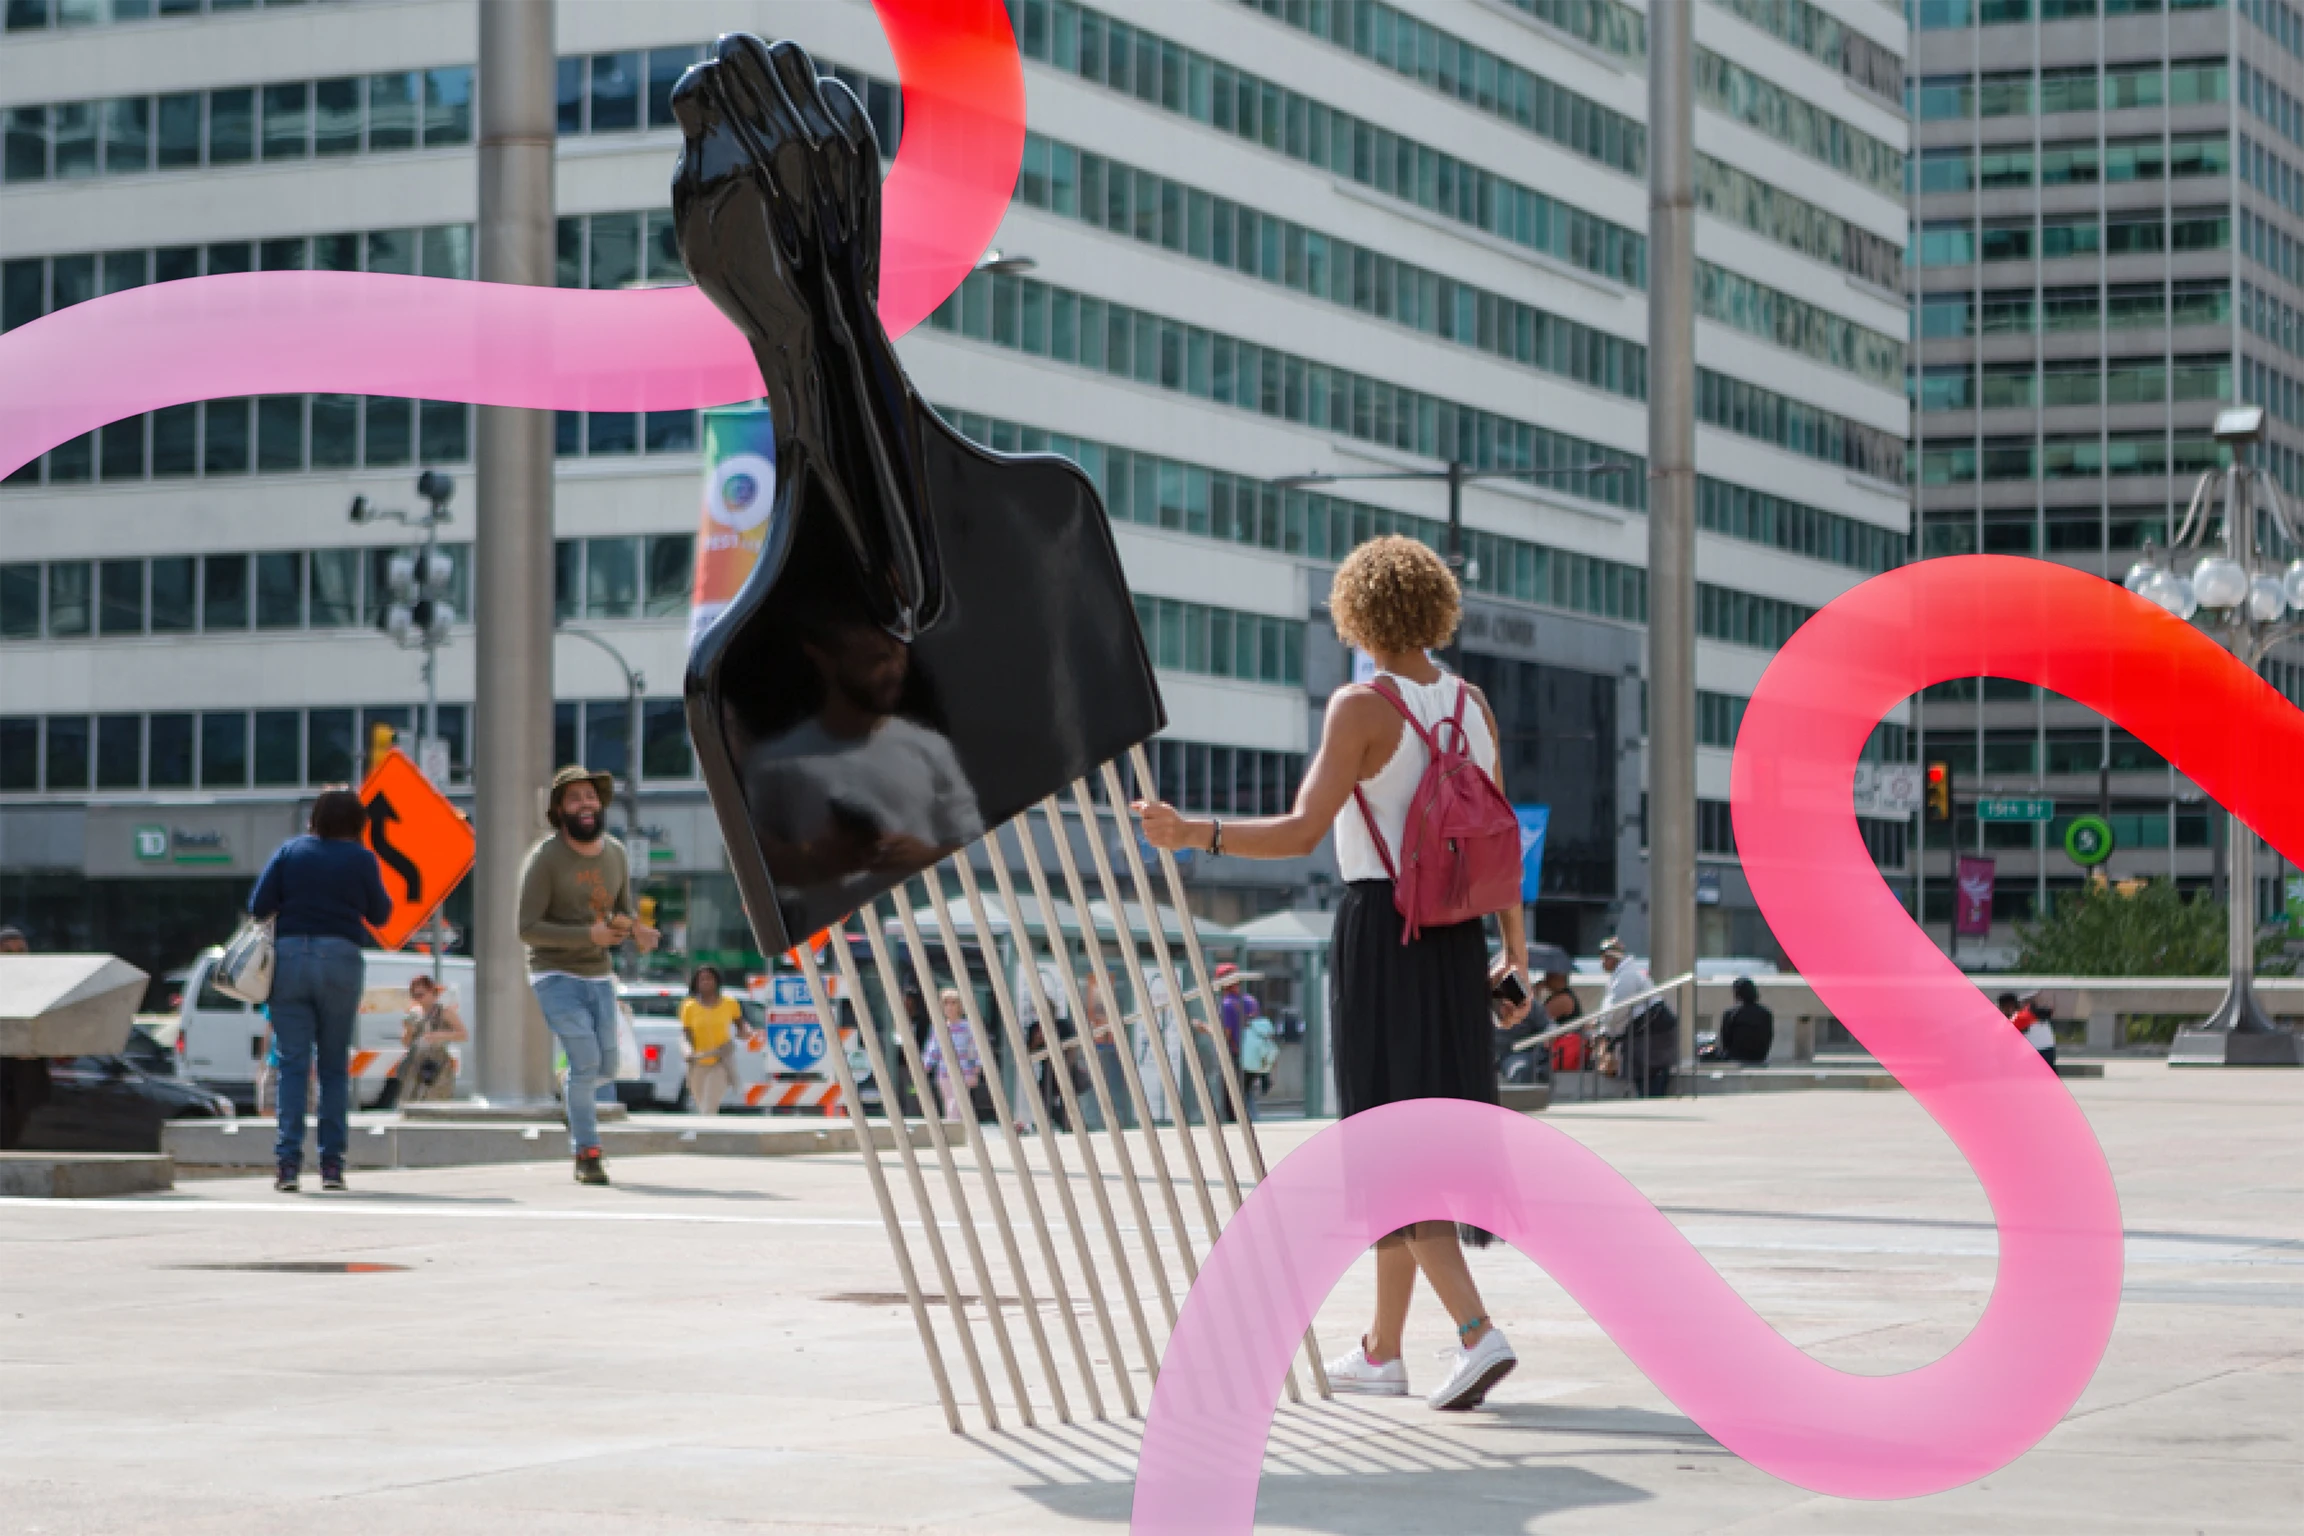 On a plaza in an urban setting, a large piece of public art is an oversized hair pick